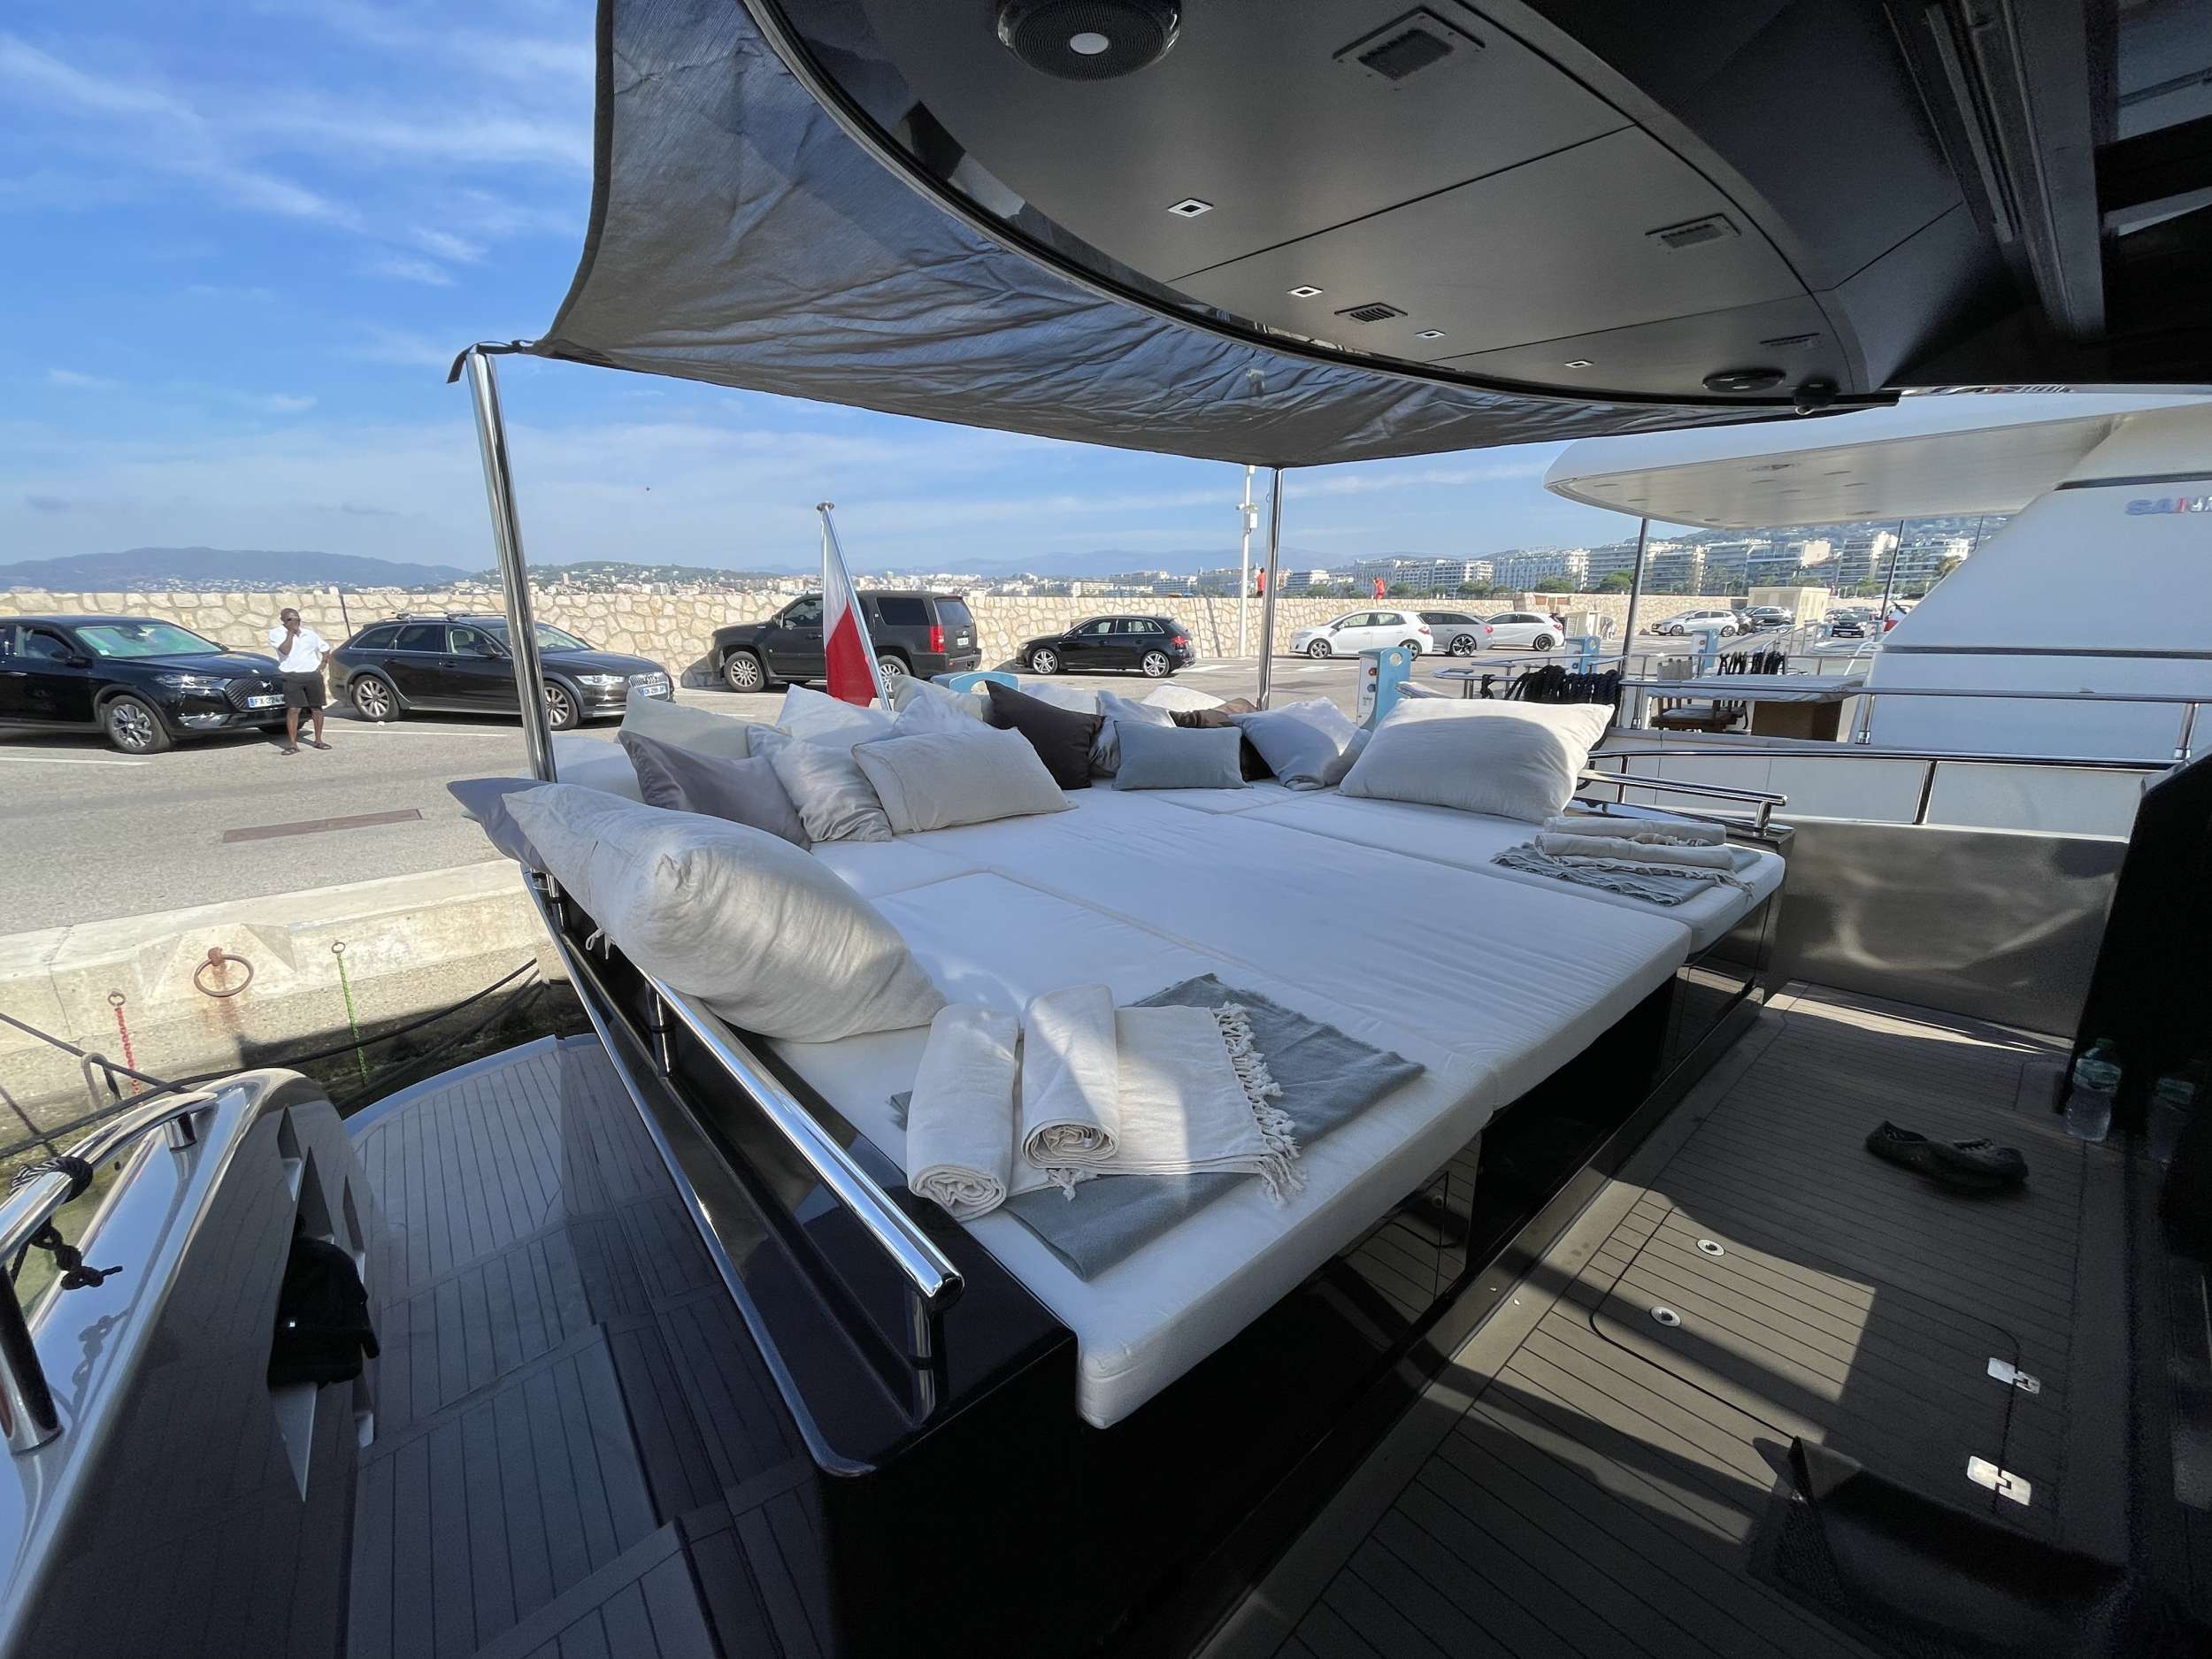 TOMMY I - Yacht Charter Cannes & Boat hire in Fr. Riviera, Corsica & Sardinia 4